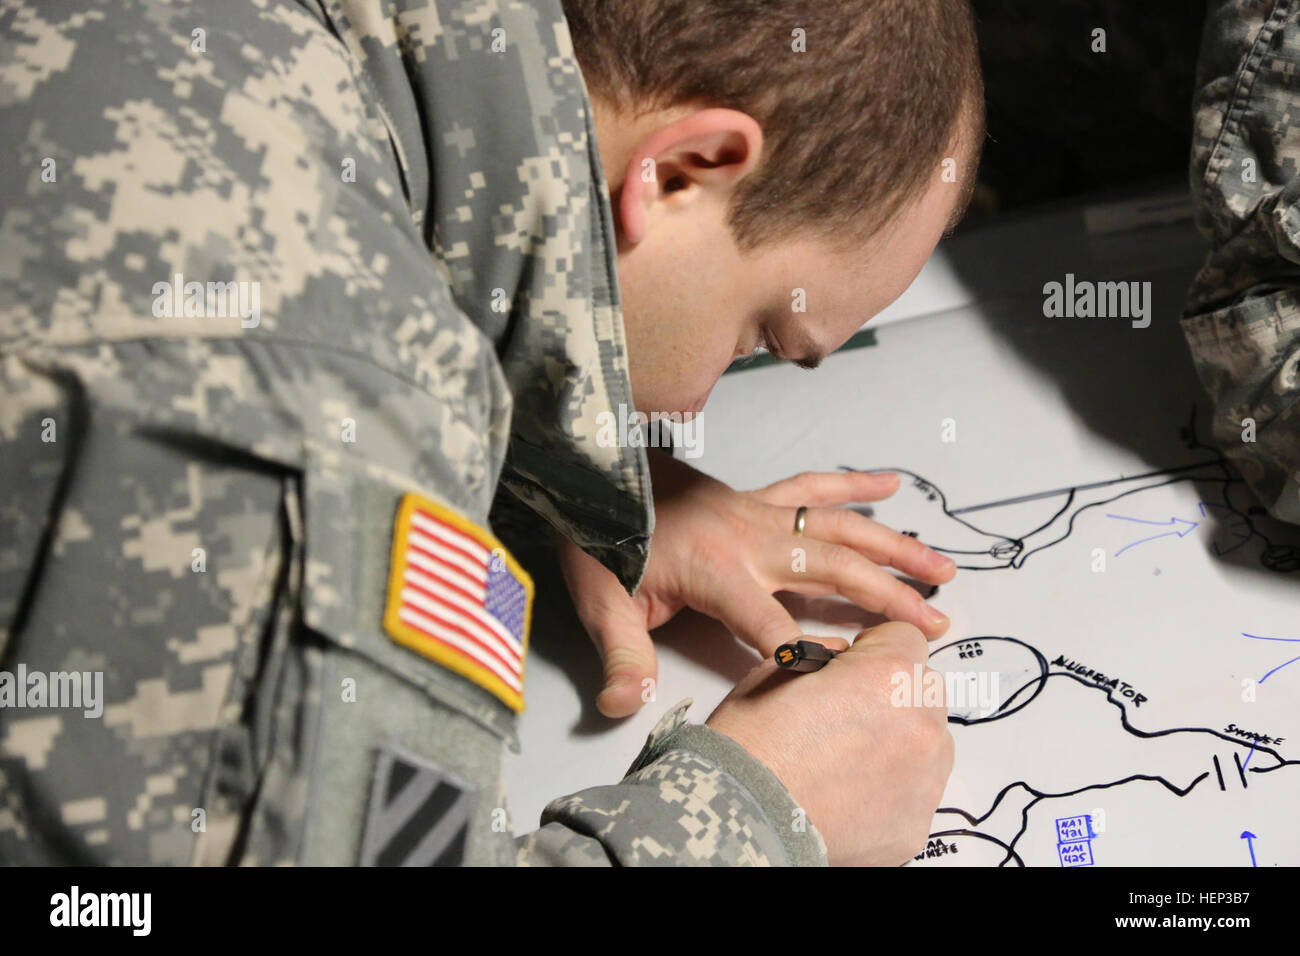 U.S. Army Sgt. Jesus Moreta of 2nd Cavalry Regiment draws a map in preparation for a course of action brief during exercise Allied Spirit at the Joint Multinational Readiness Center in Hohenfels, Germany, Jan. 23, 2015. Exercise Allied Spirit includes more than 2,000 participants from Canada, Hungary, Netherlands, United Kingdom, and the U.S. Allied Spirit is exercising tactical interoperability and testing secure communications within Alliance members. (U.S. Army photo by Sgt. Gemma Iglesias/Released) Allied Spirit I 150123-A-QC664-005 Stock Photo